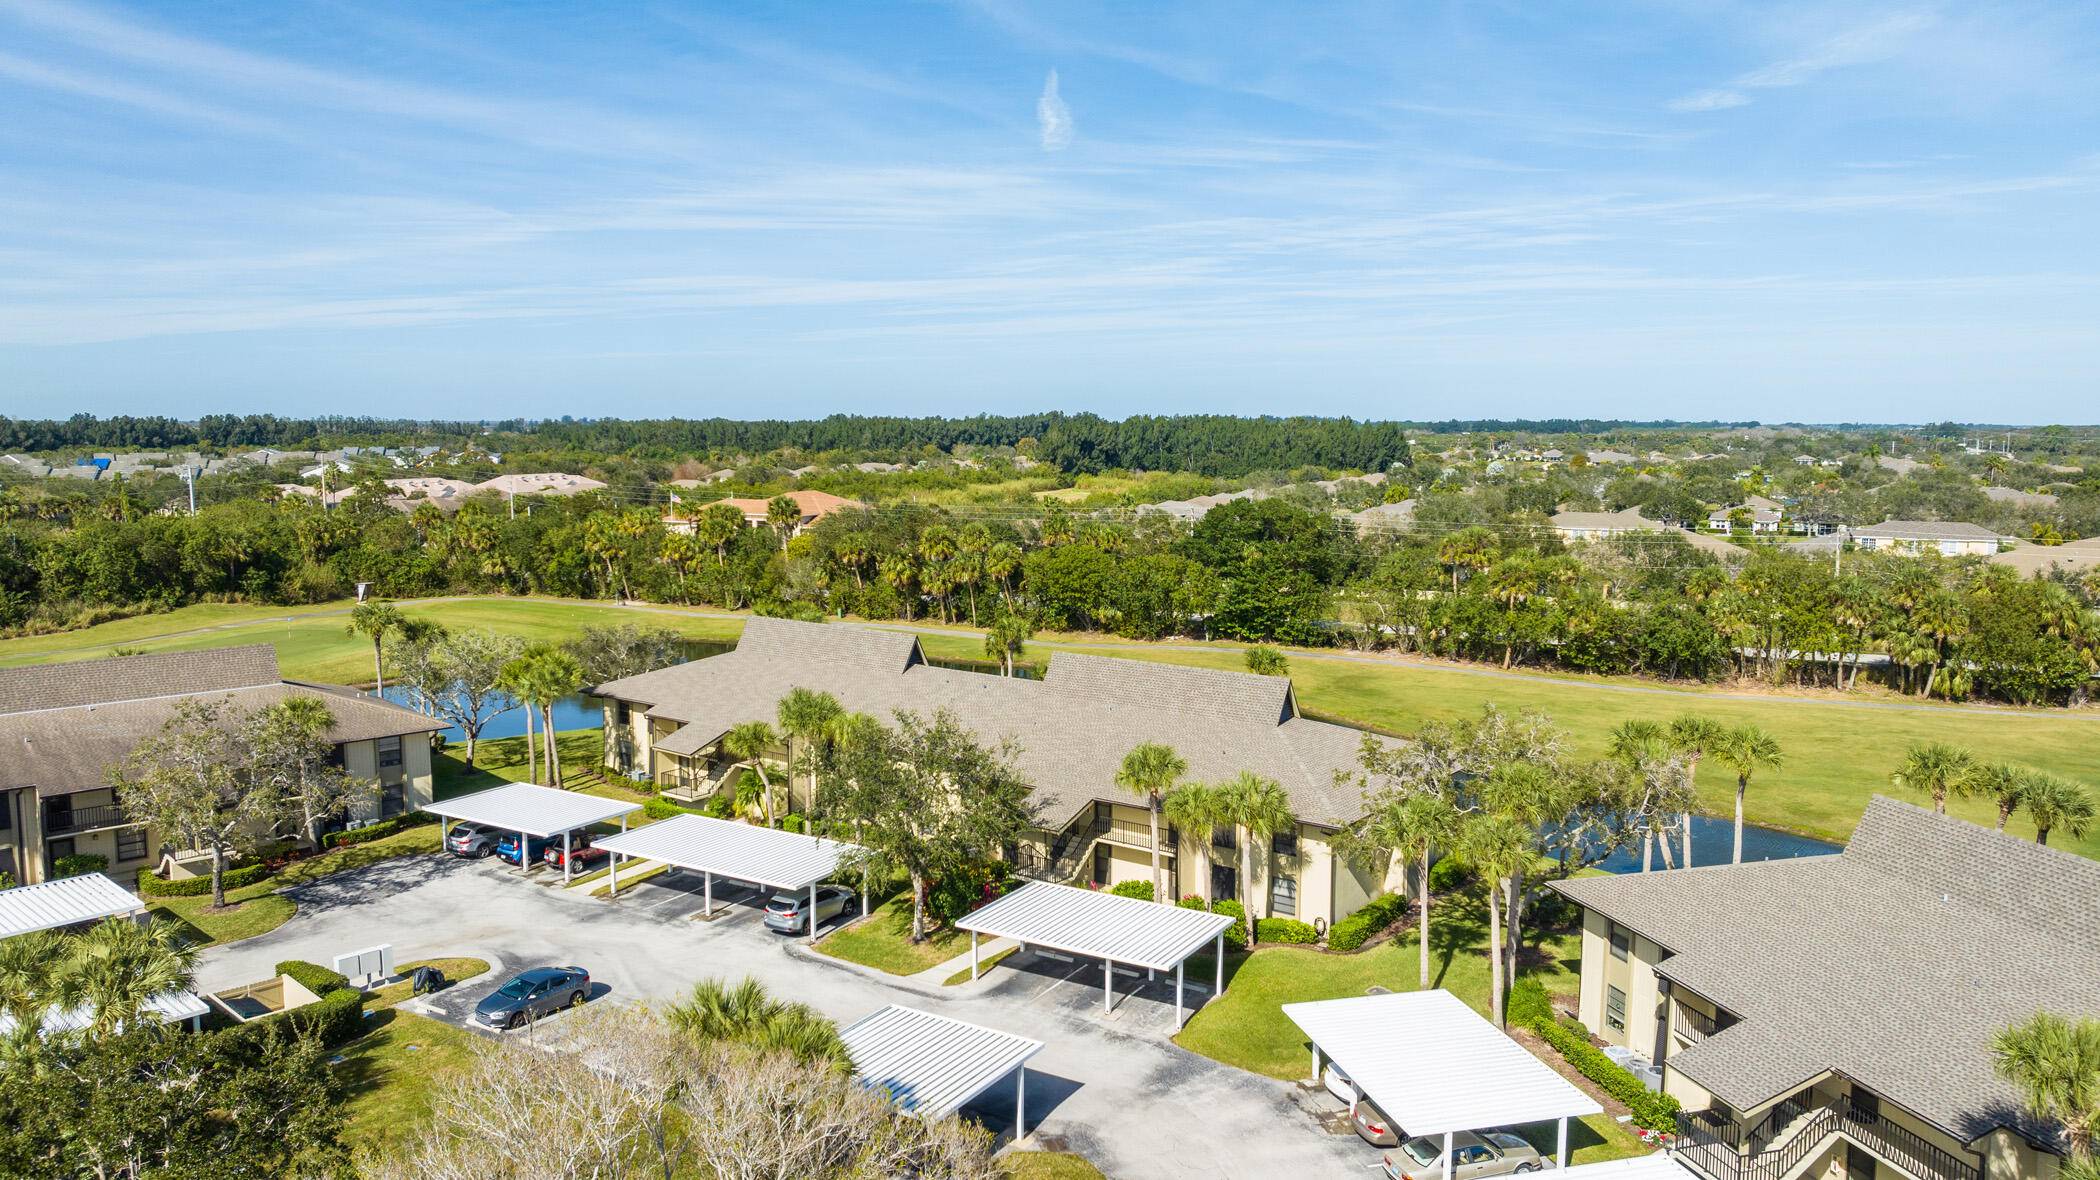 This is a beautiful two bedroom condo on a golf course in Vero Beach.